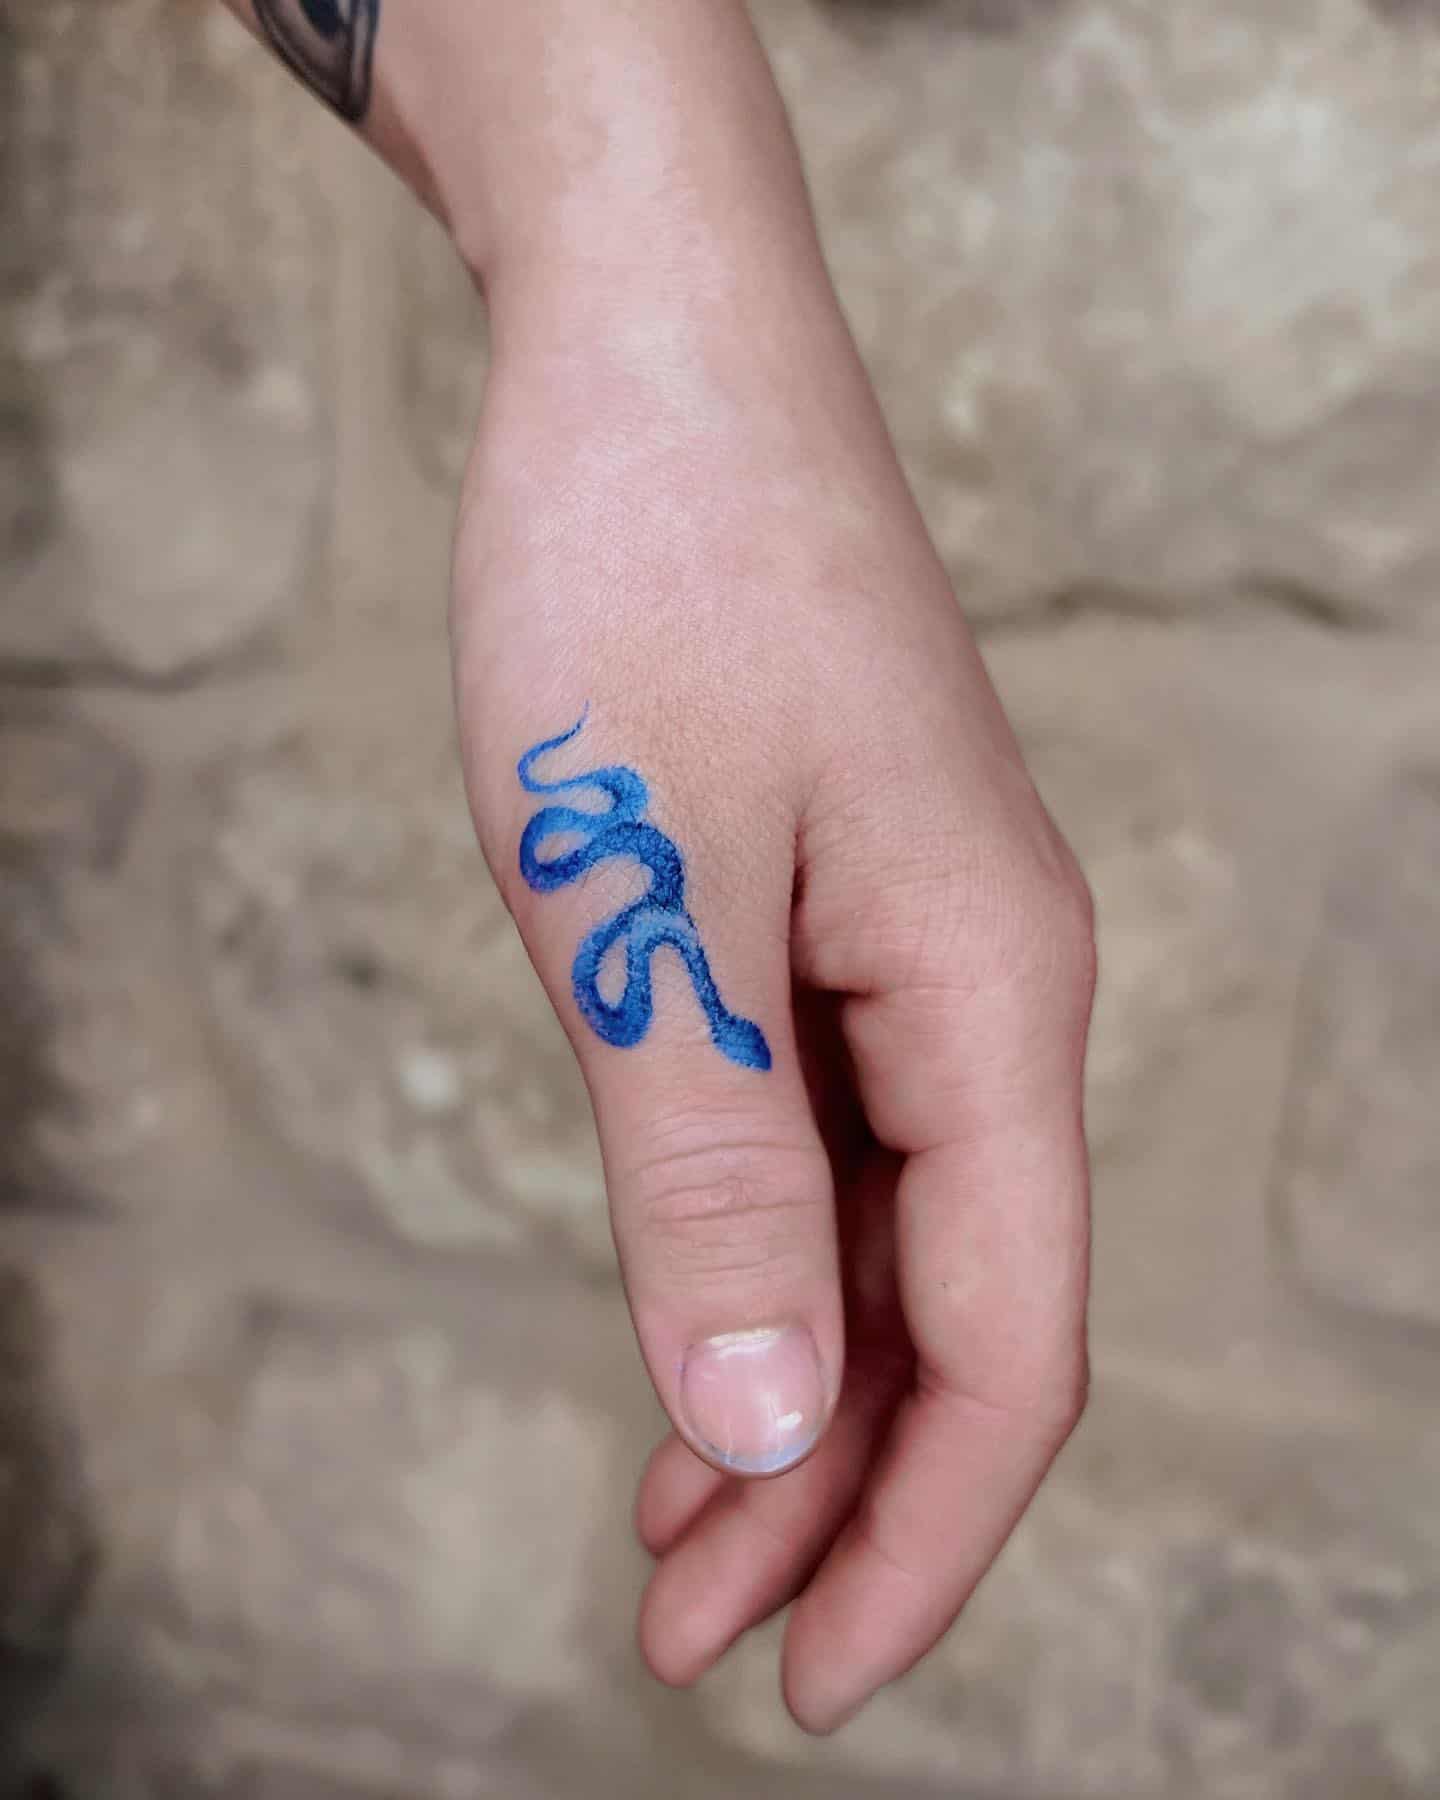 50 Best Snake Tattoo Design Ideas & Meaning (2023) - The Trend Spotter